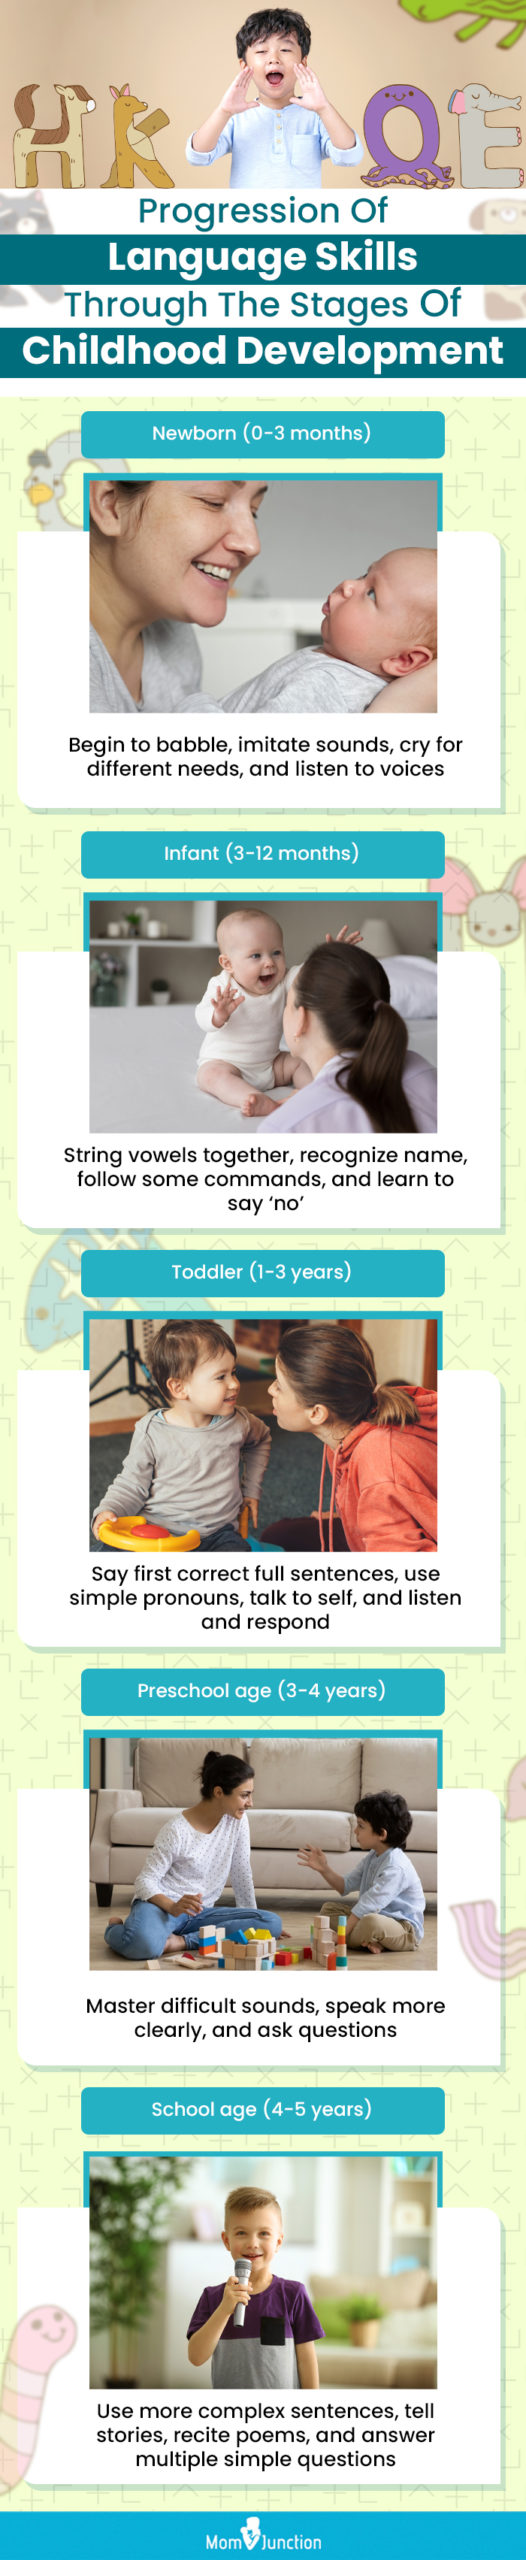 progression of language skills through the stages of childhood development (infographic)